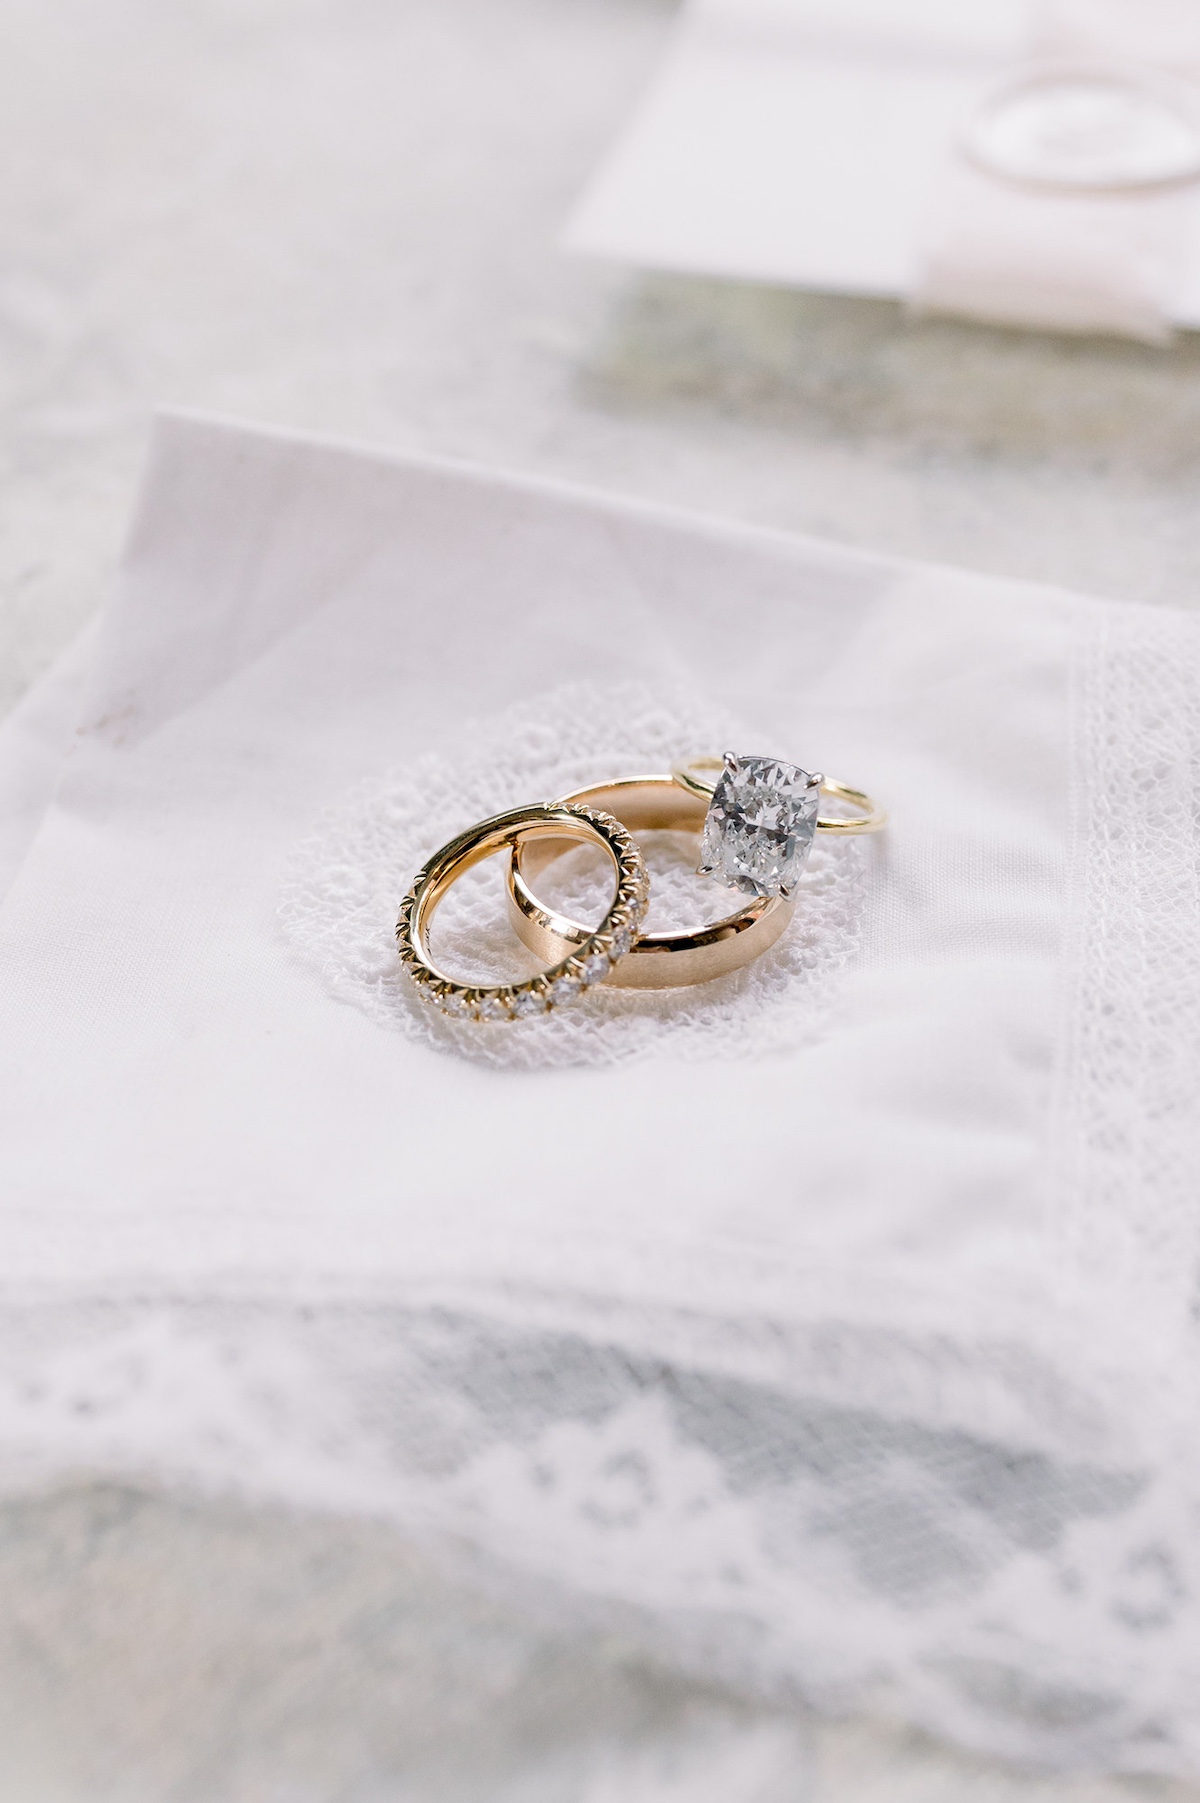 A sophisticated flatlay featuring the couple's wedding rings, arranged with timeless elegance.